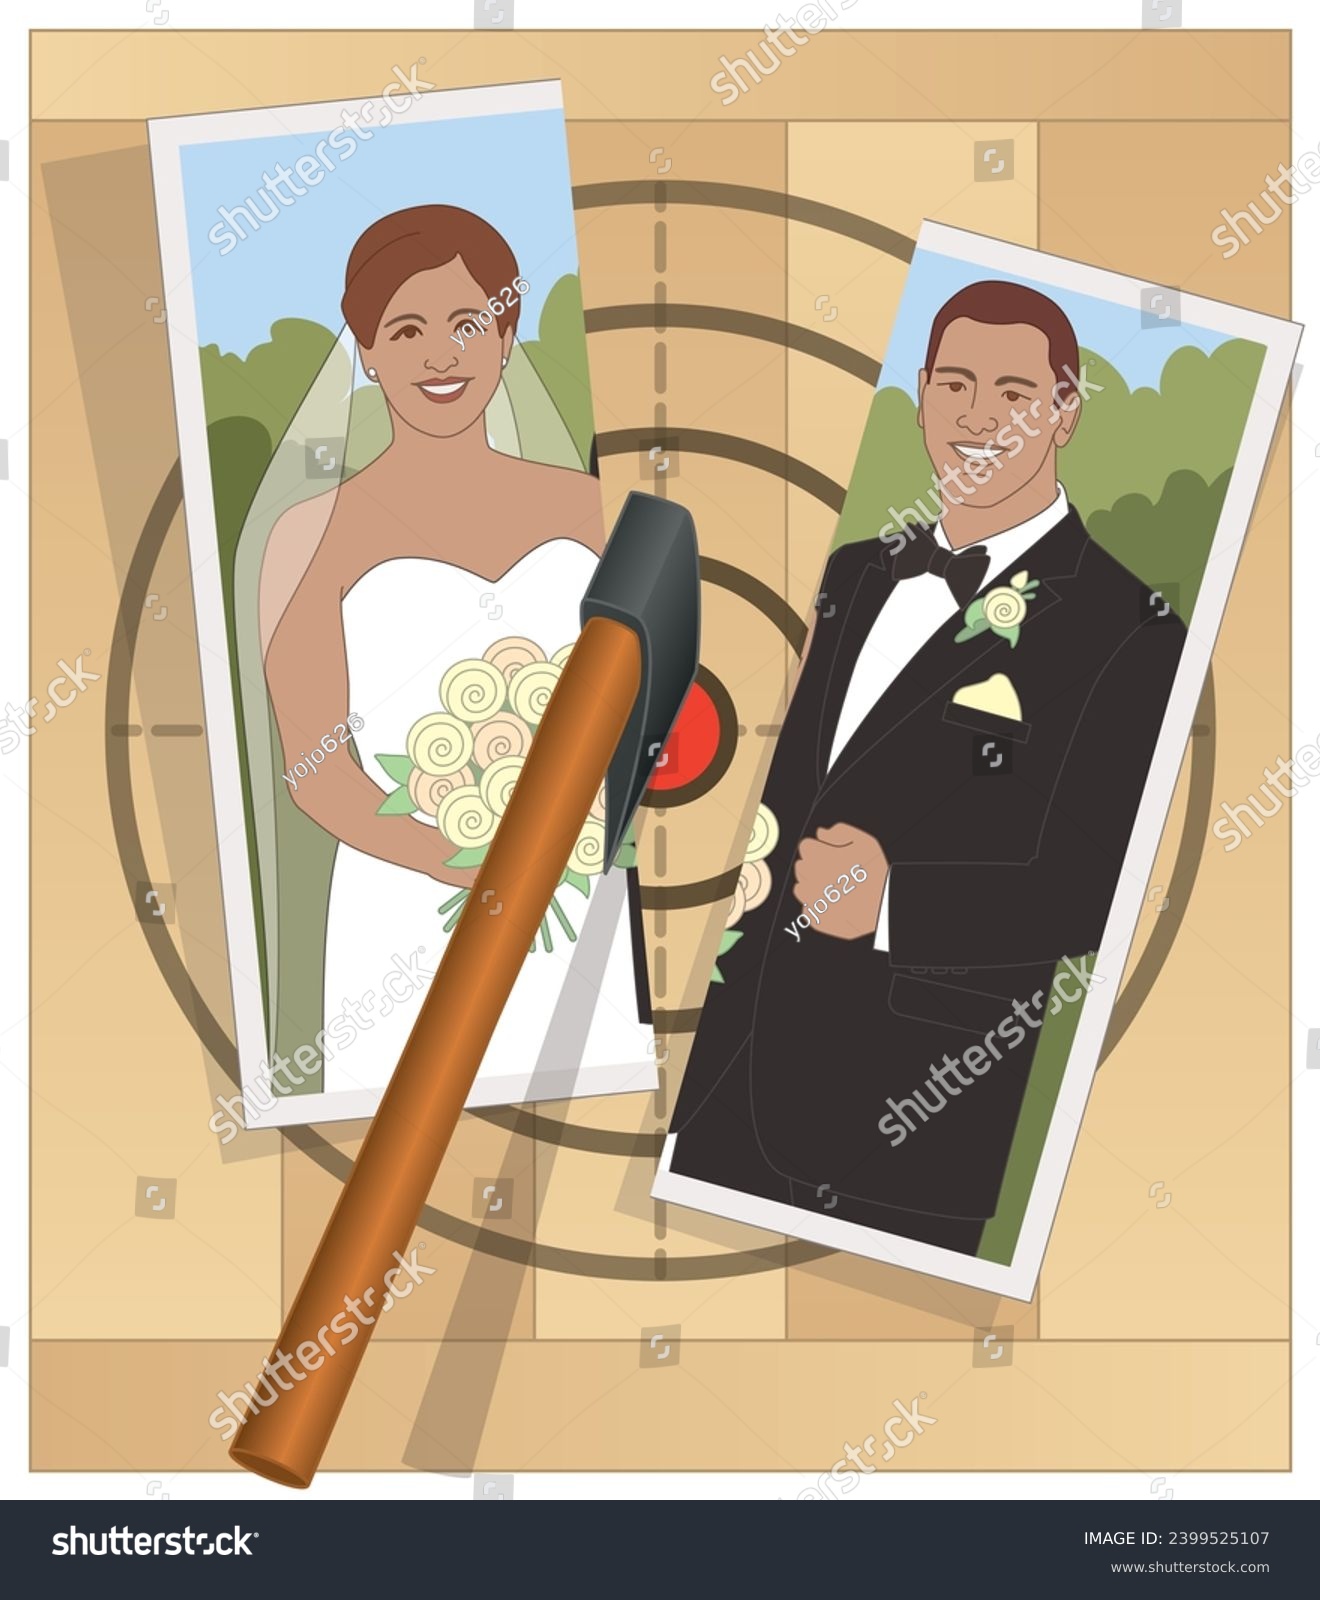 SVG of axe throwing, axe cutting in half photo of bride and groom on target svg